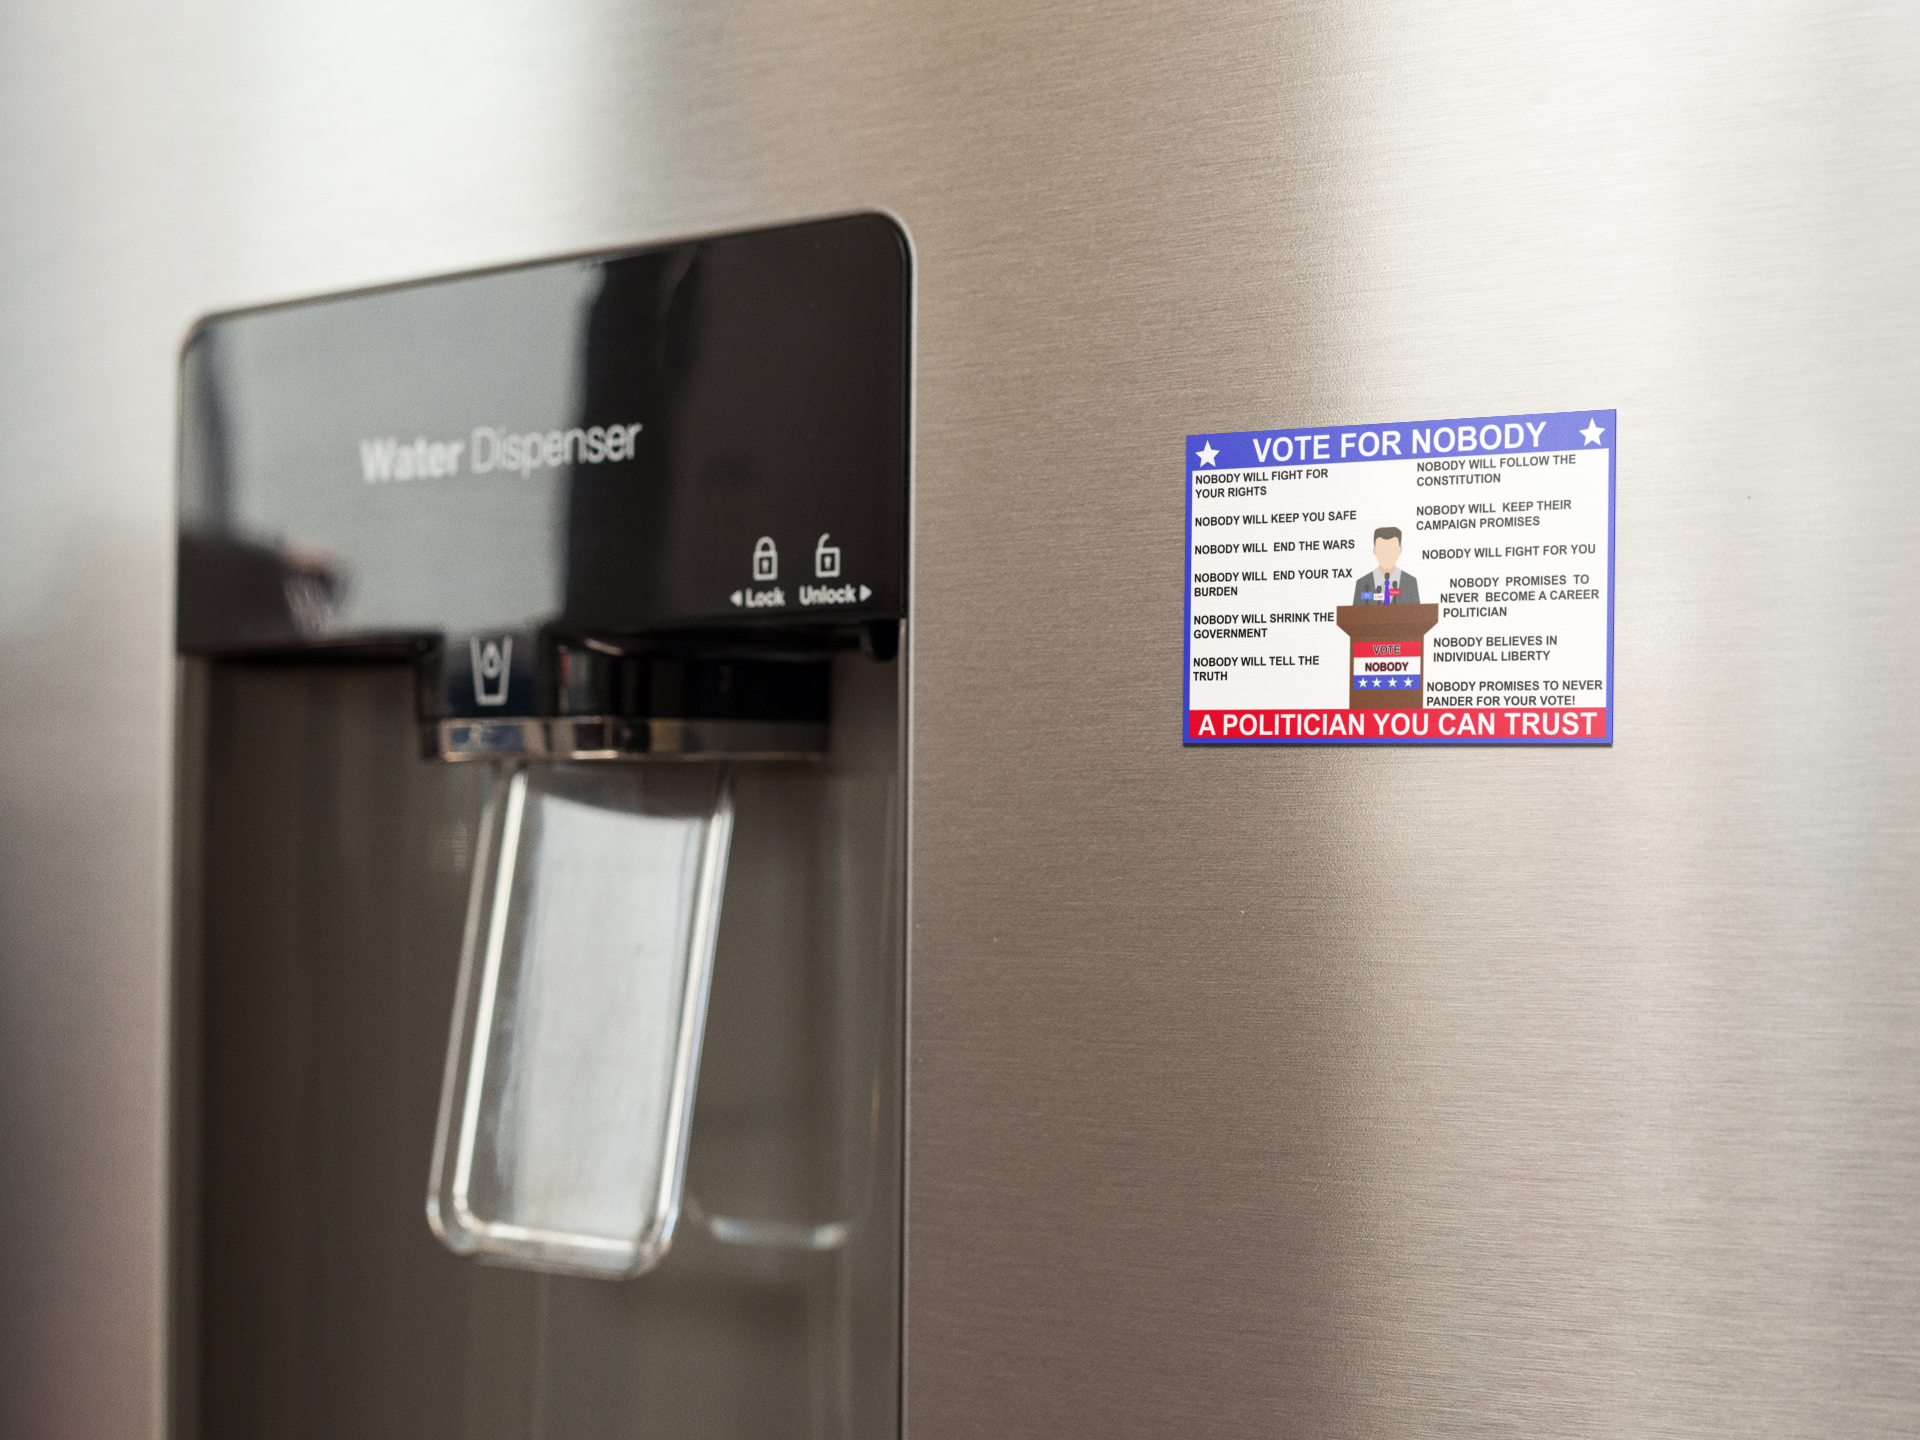 Vote for nobody a politician you can trust refrigerator magnet, fridge magnet family Fridge magnet funny gift for mom gift for wife Handmade Kitchen decor magnet Magnetic clip Magnetic photo holder Modern design Note holder Office accessory Reminder board Shopping list Strong magnet Unique gift